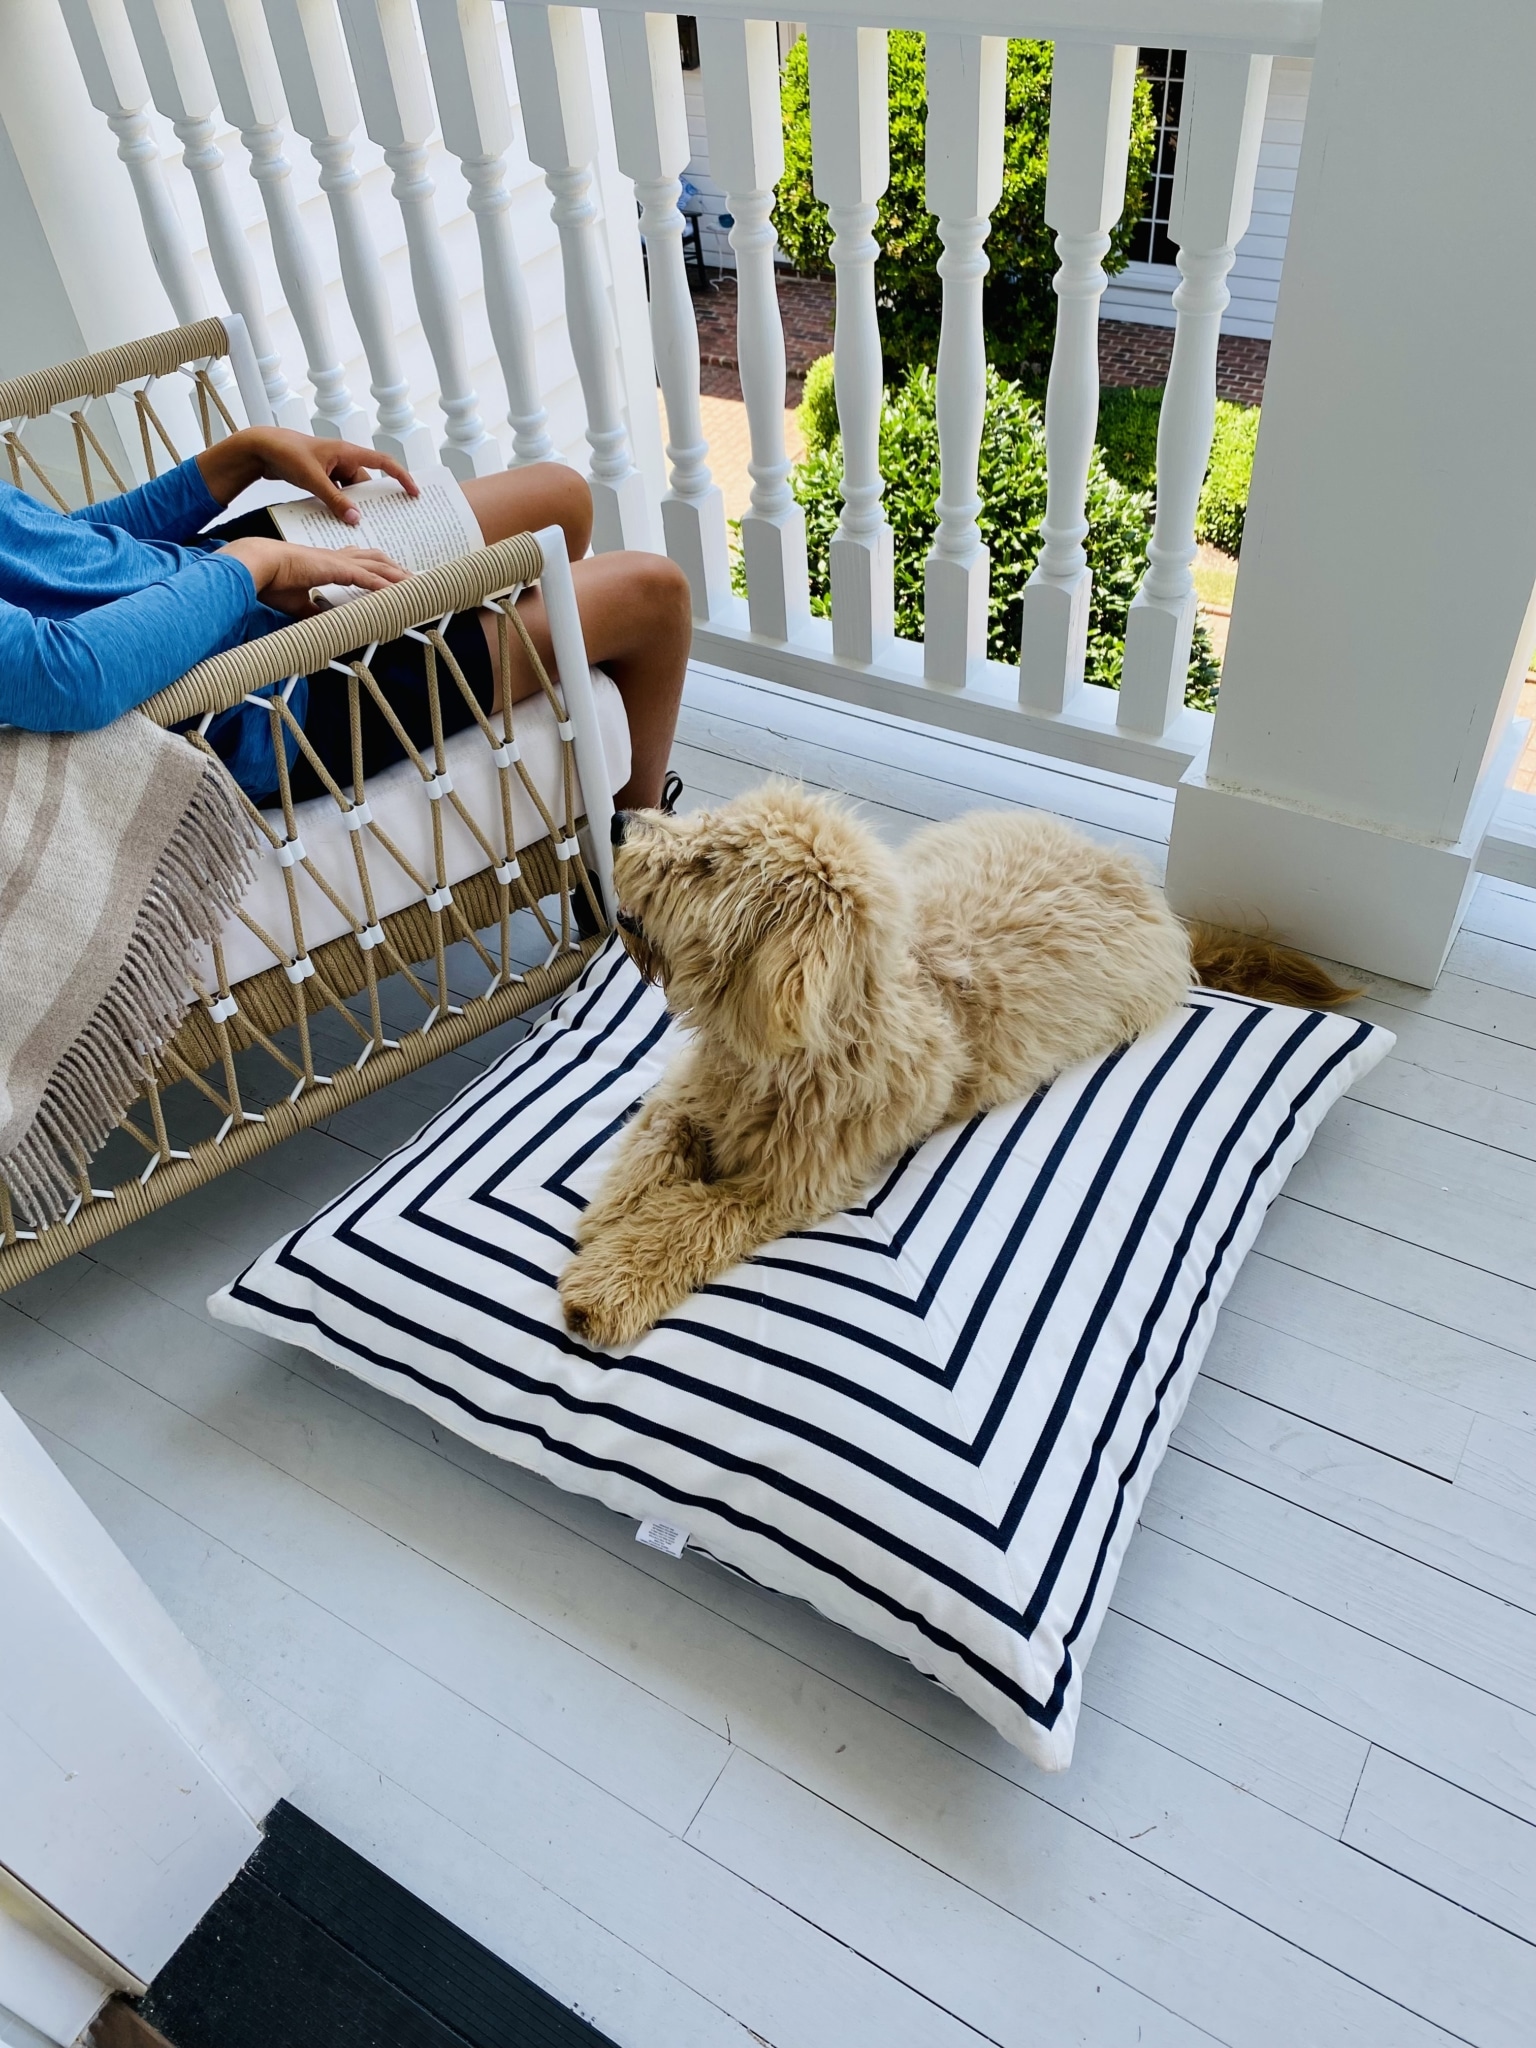 outdoor living - Serena & Lily - - porch - living room - outdoor living room - covered porch